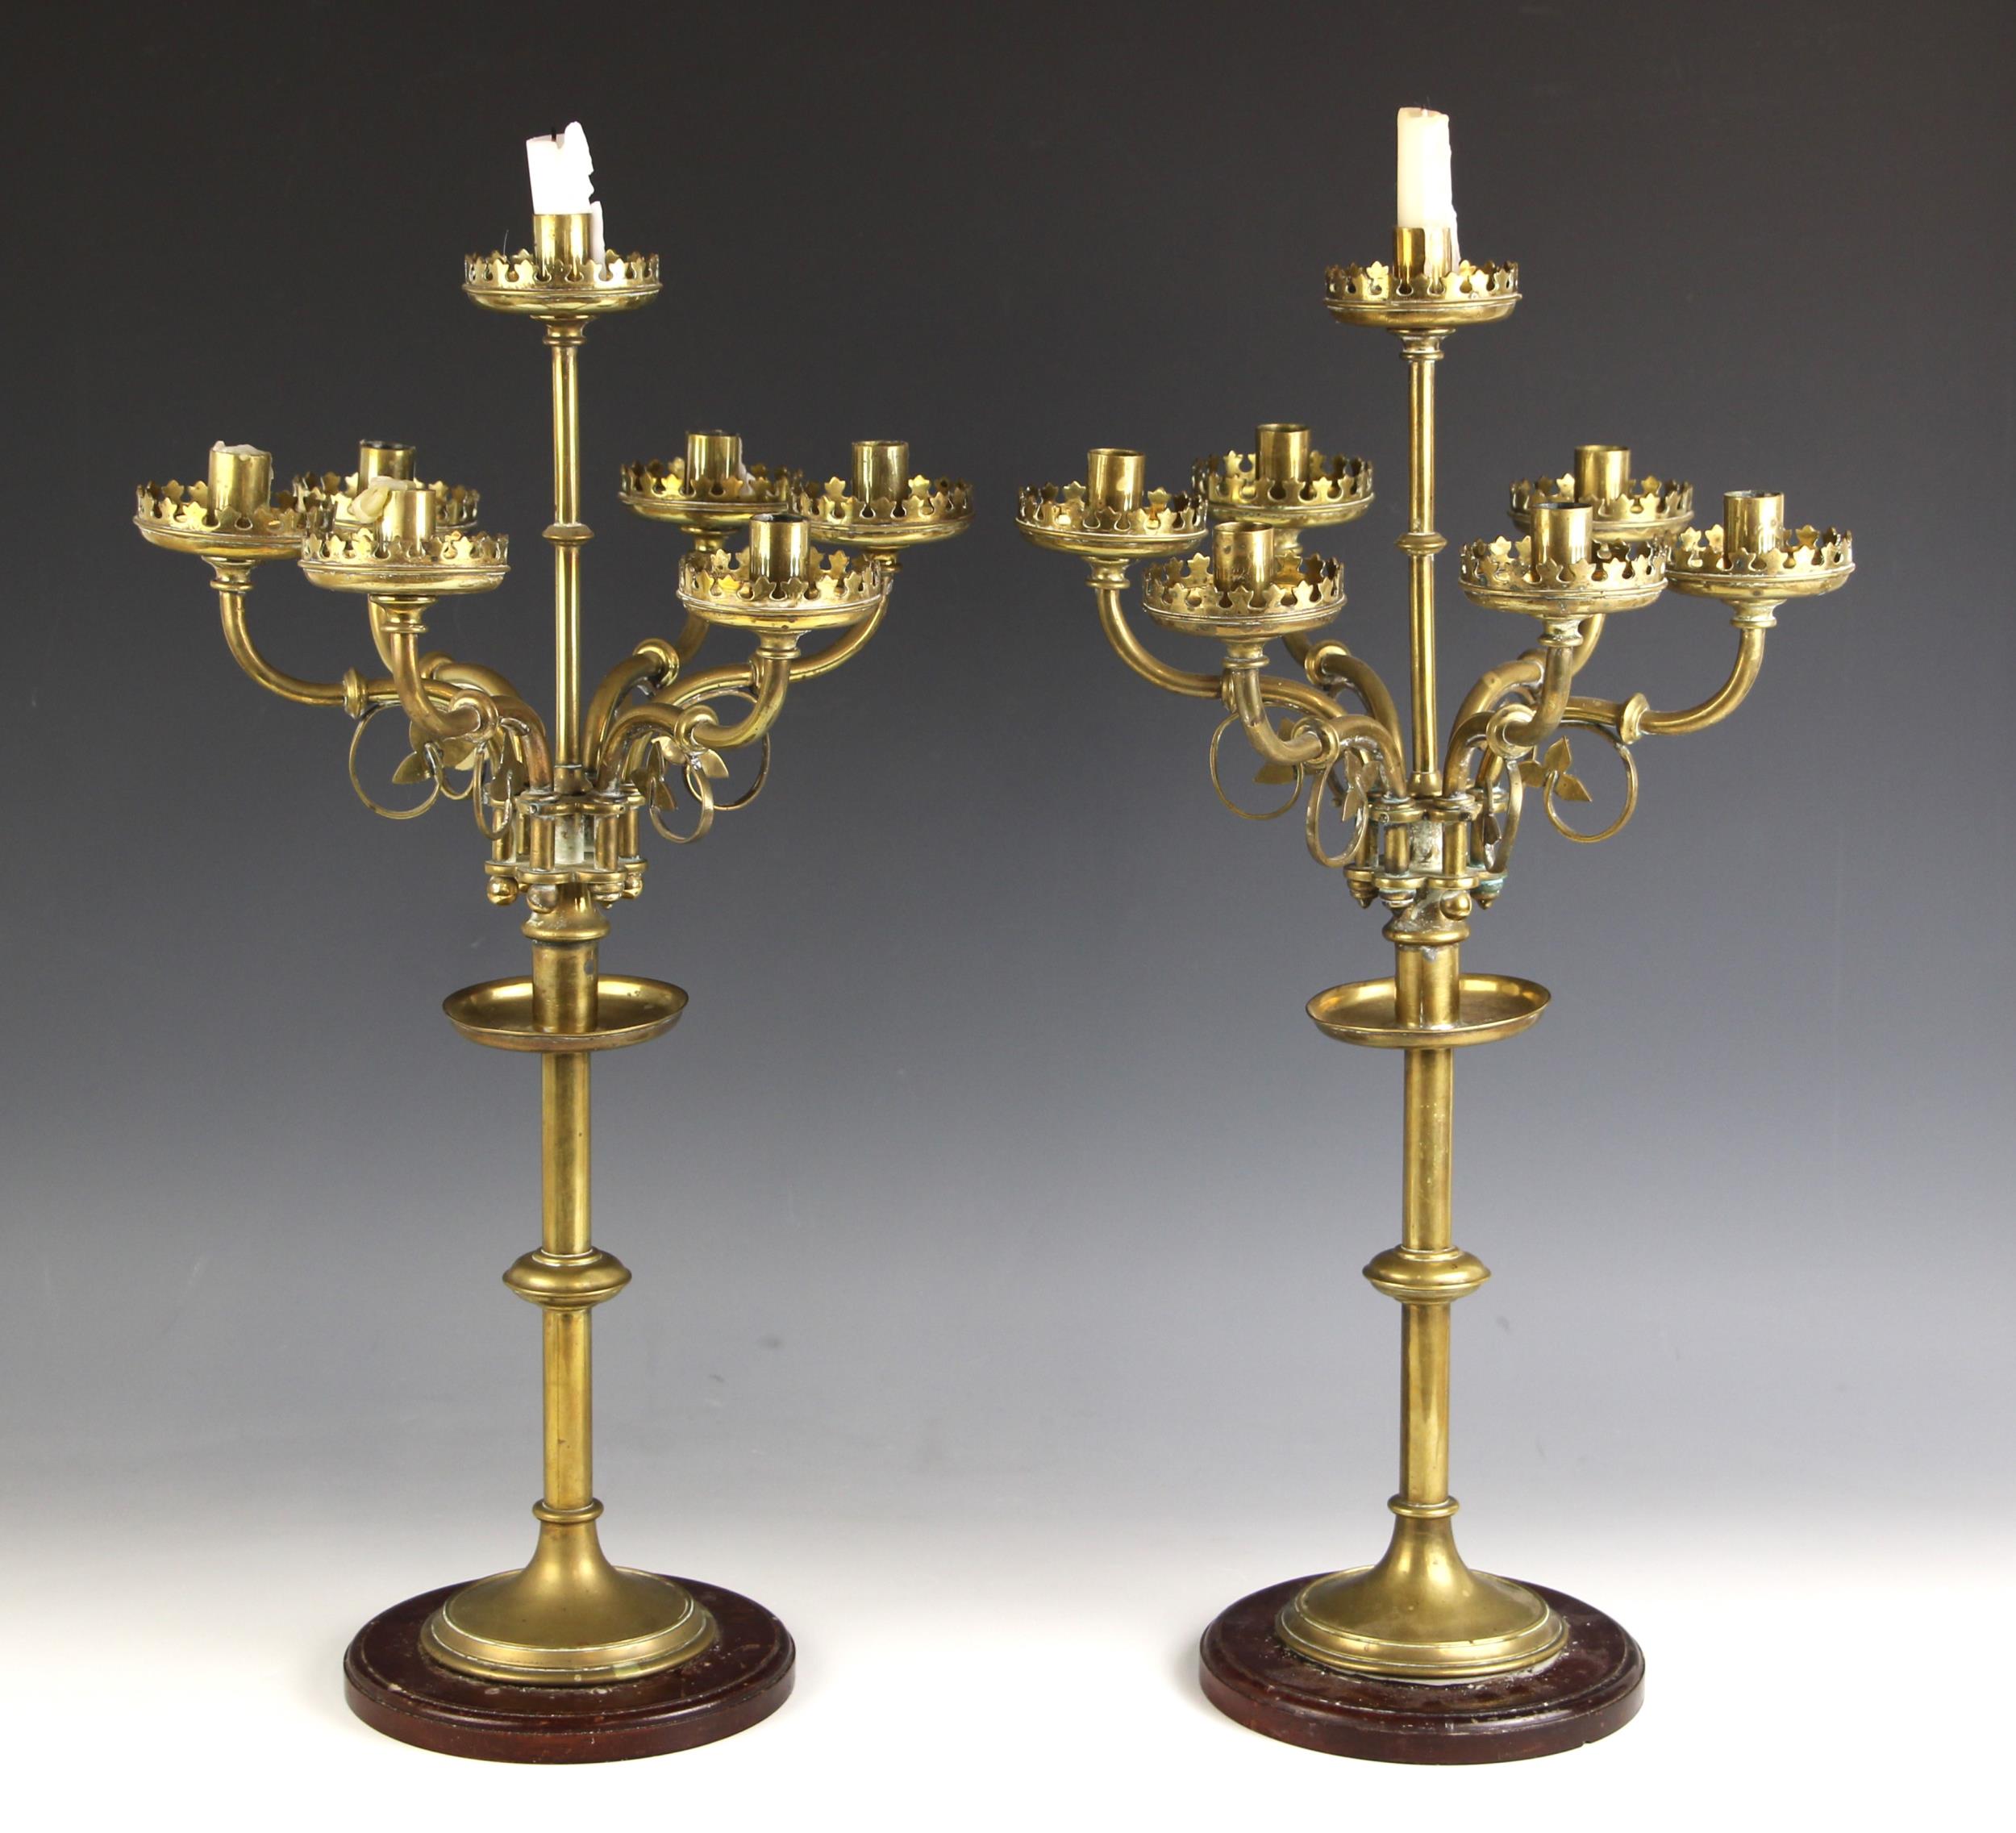 A pair of Ecclesiastical brass six-branch candelabrum with central sconce, late 19th century, each